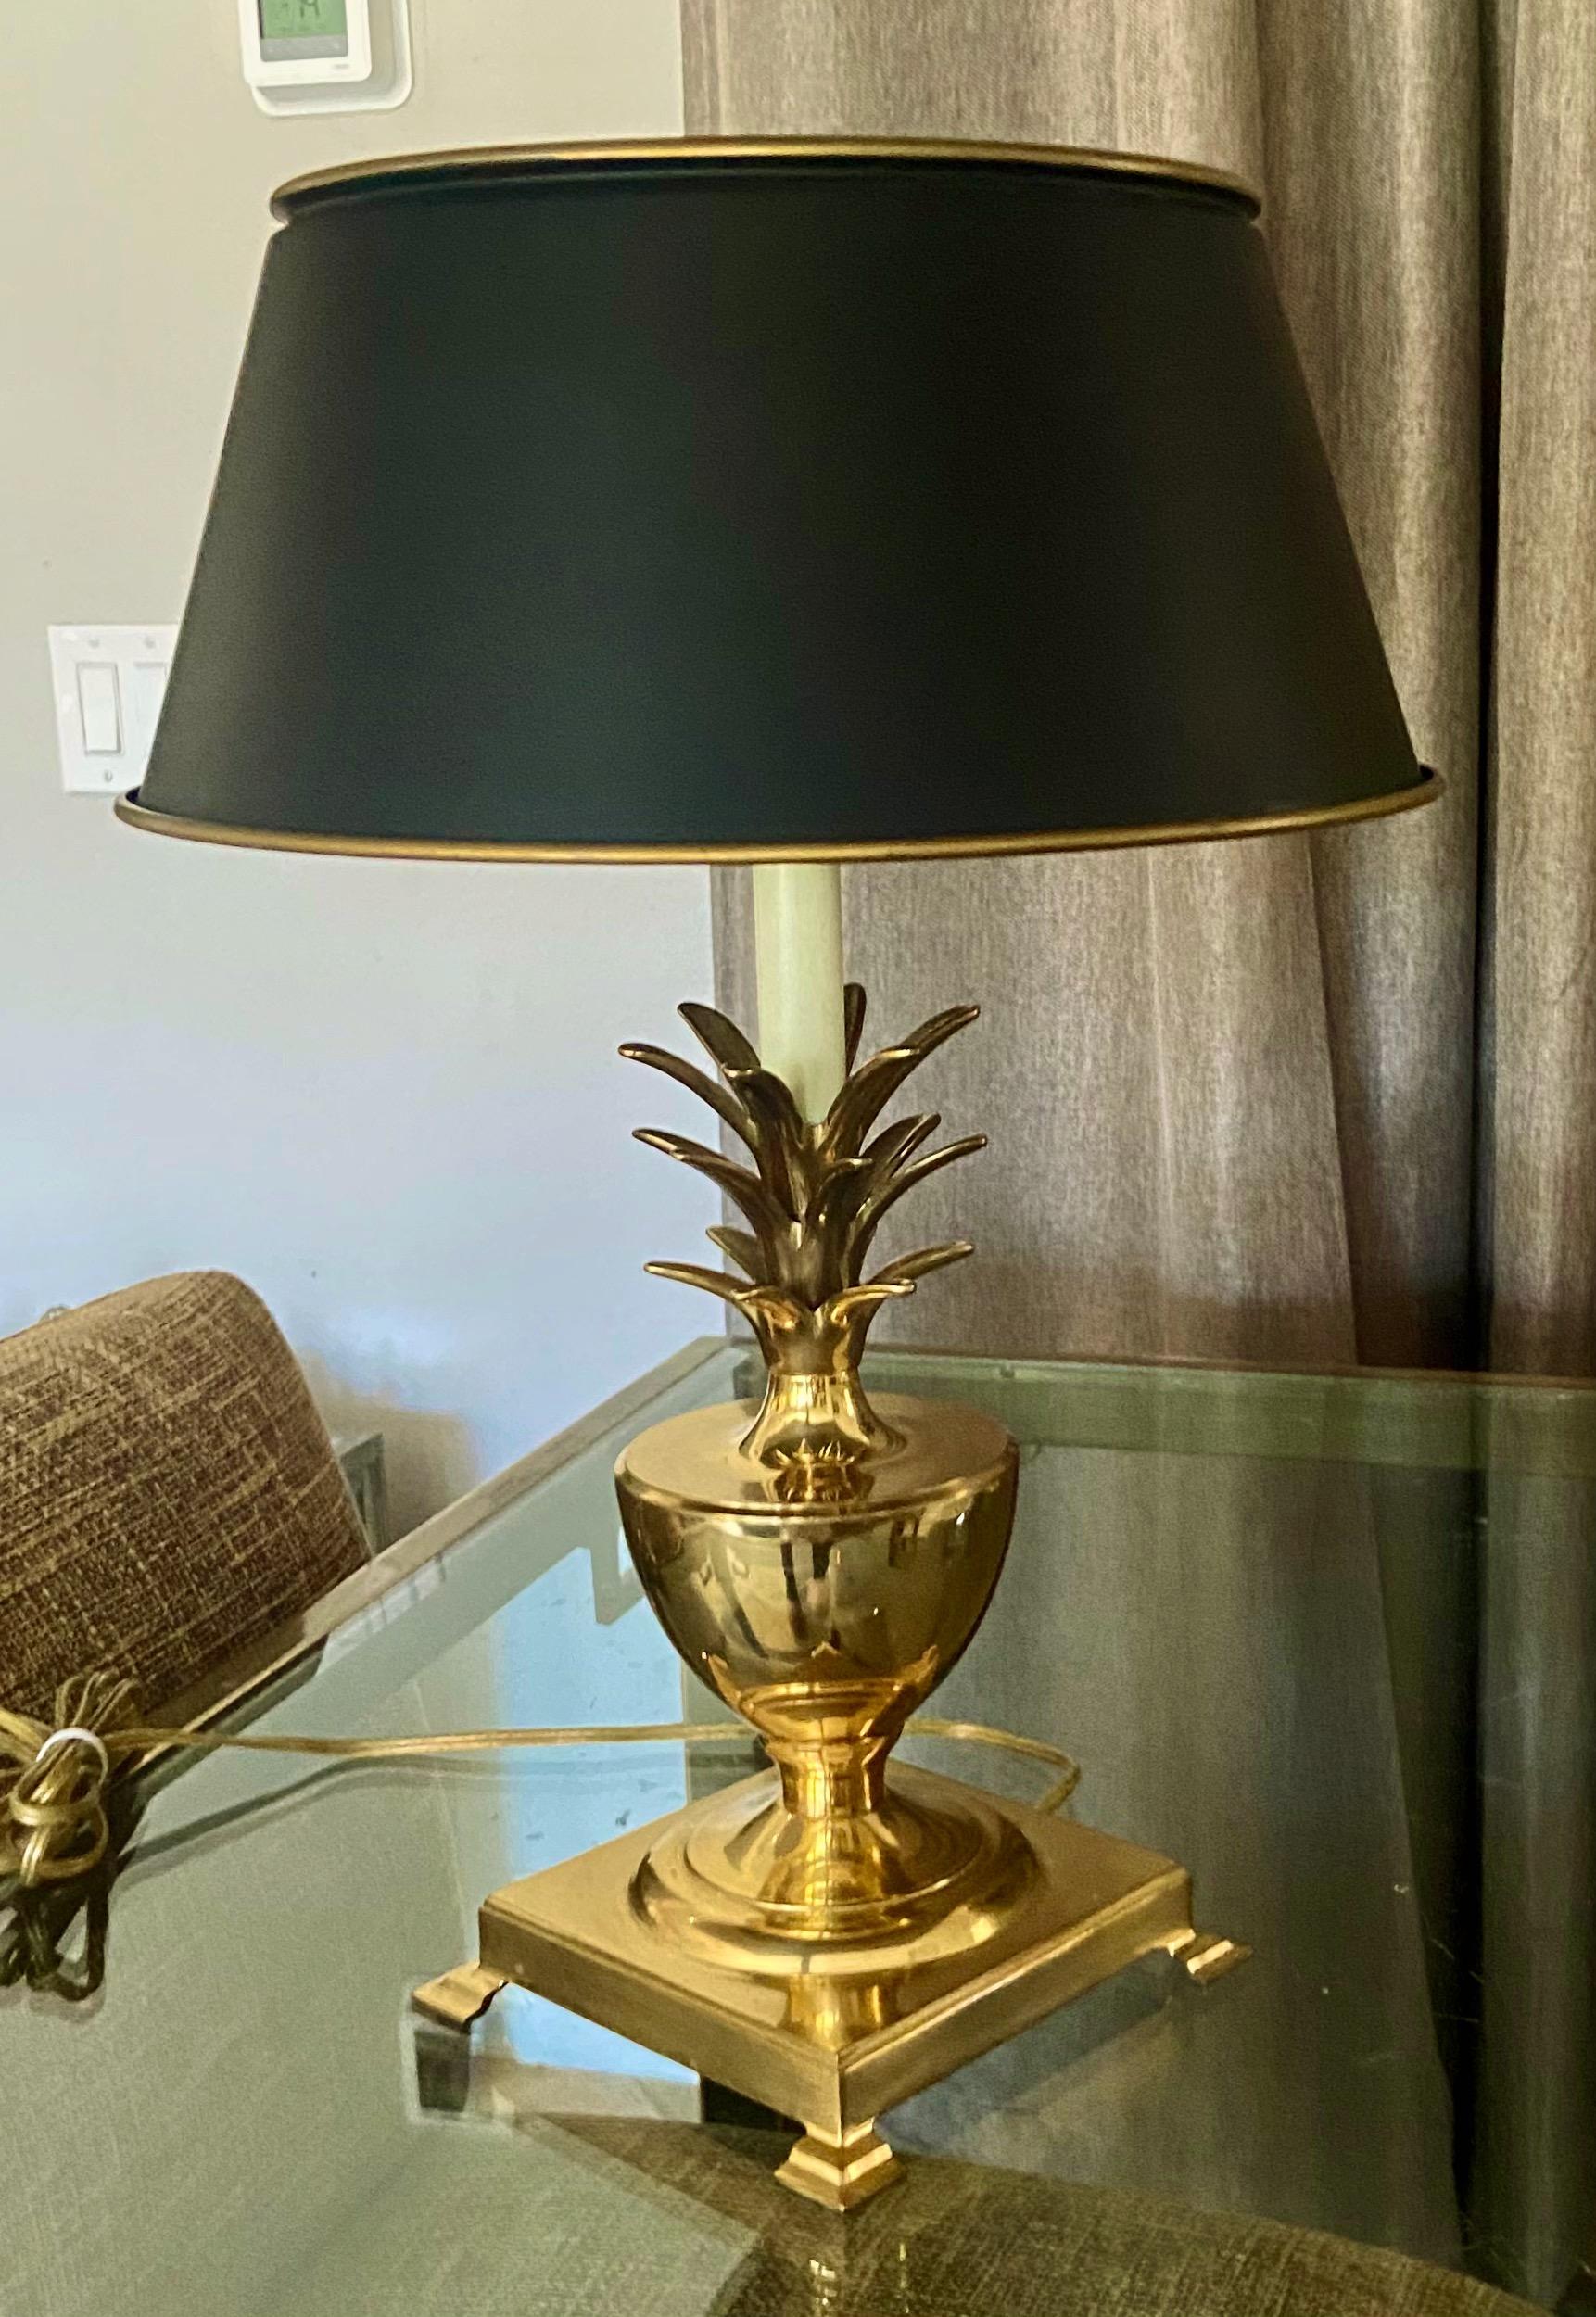 Solid brass pineapple motif 2 light table or desk lamp with black tole shade, in manner of Maison Charles. Lamp portion 6.5